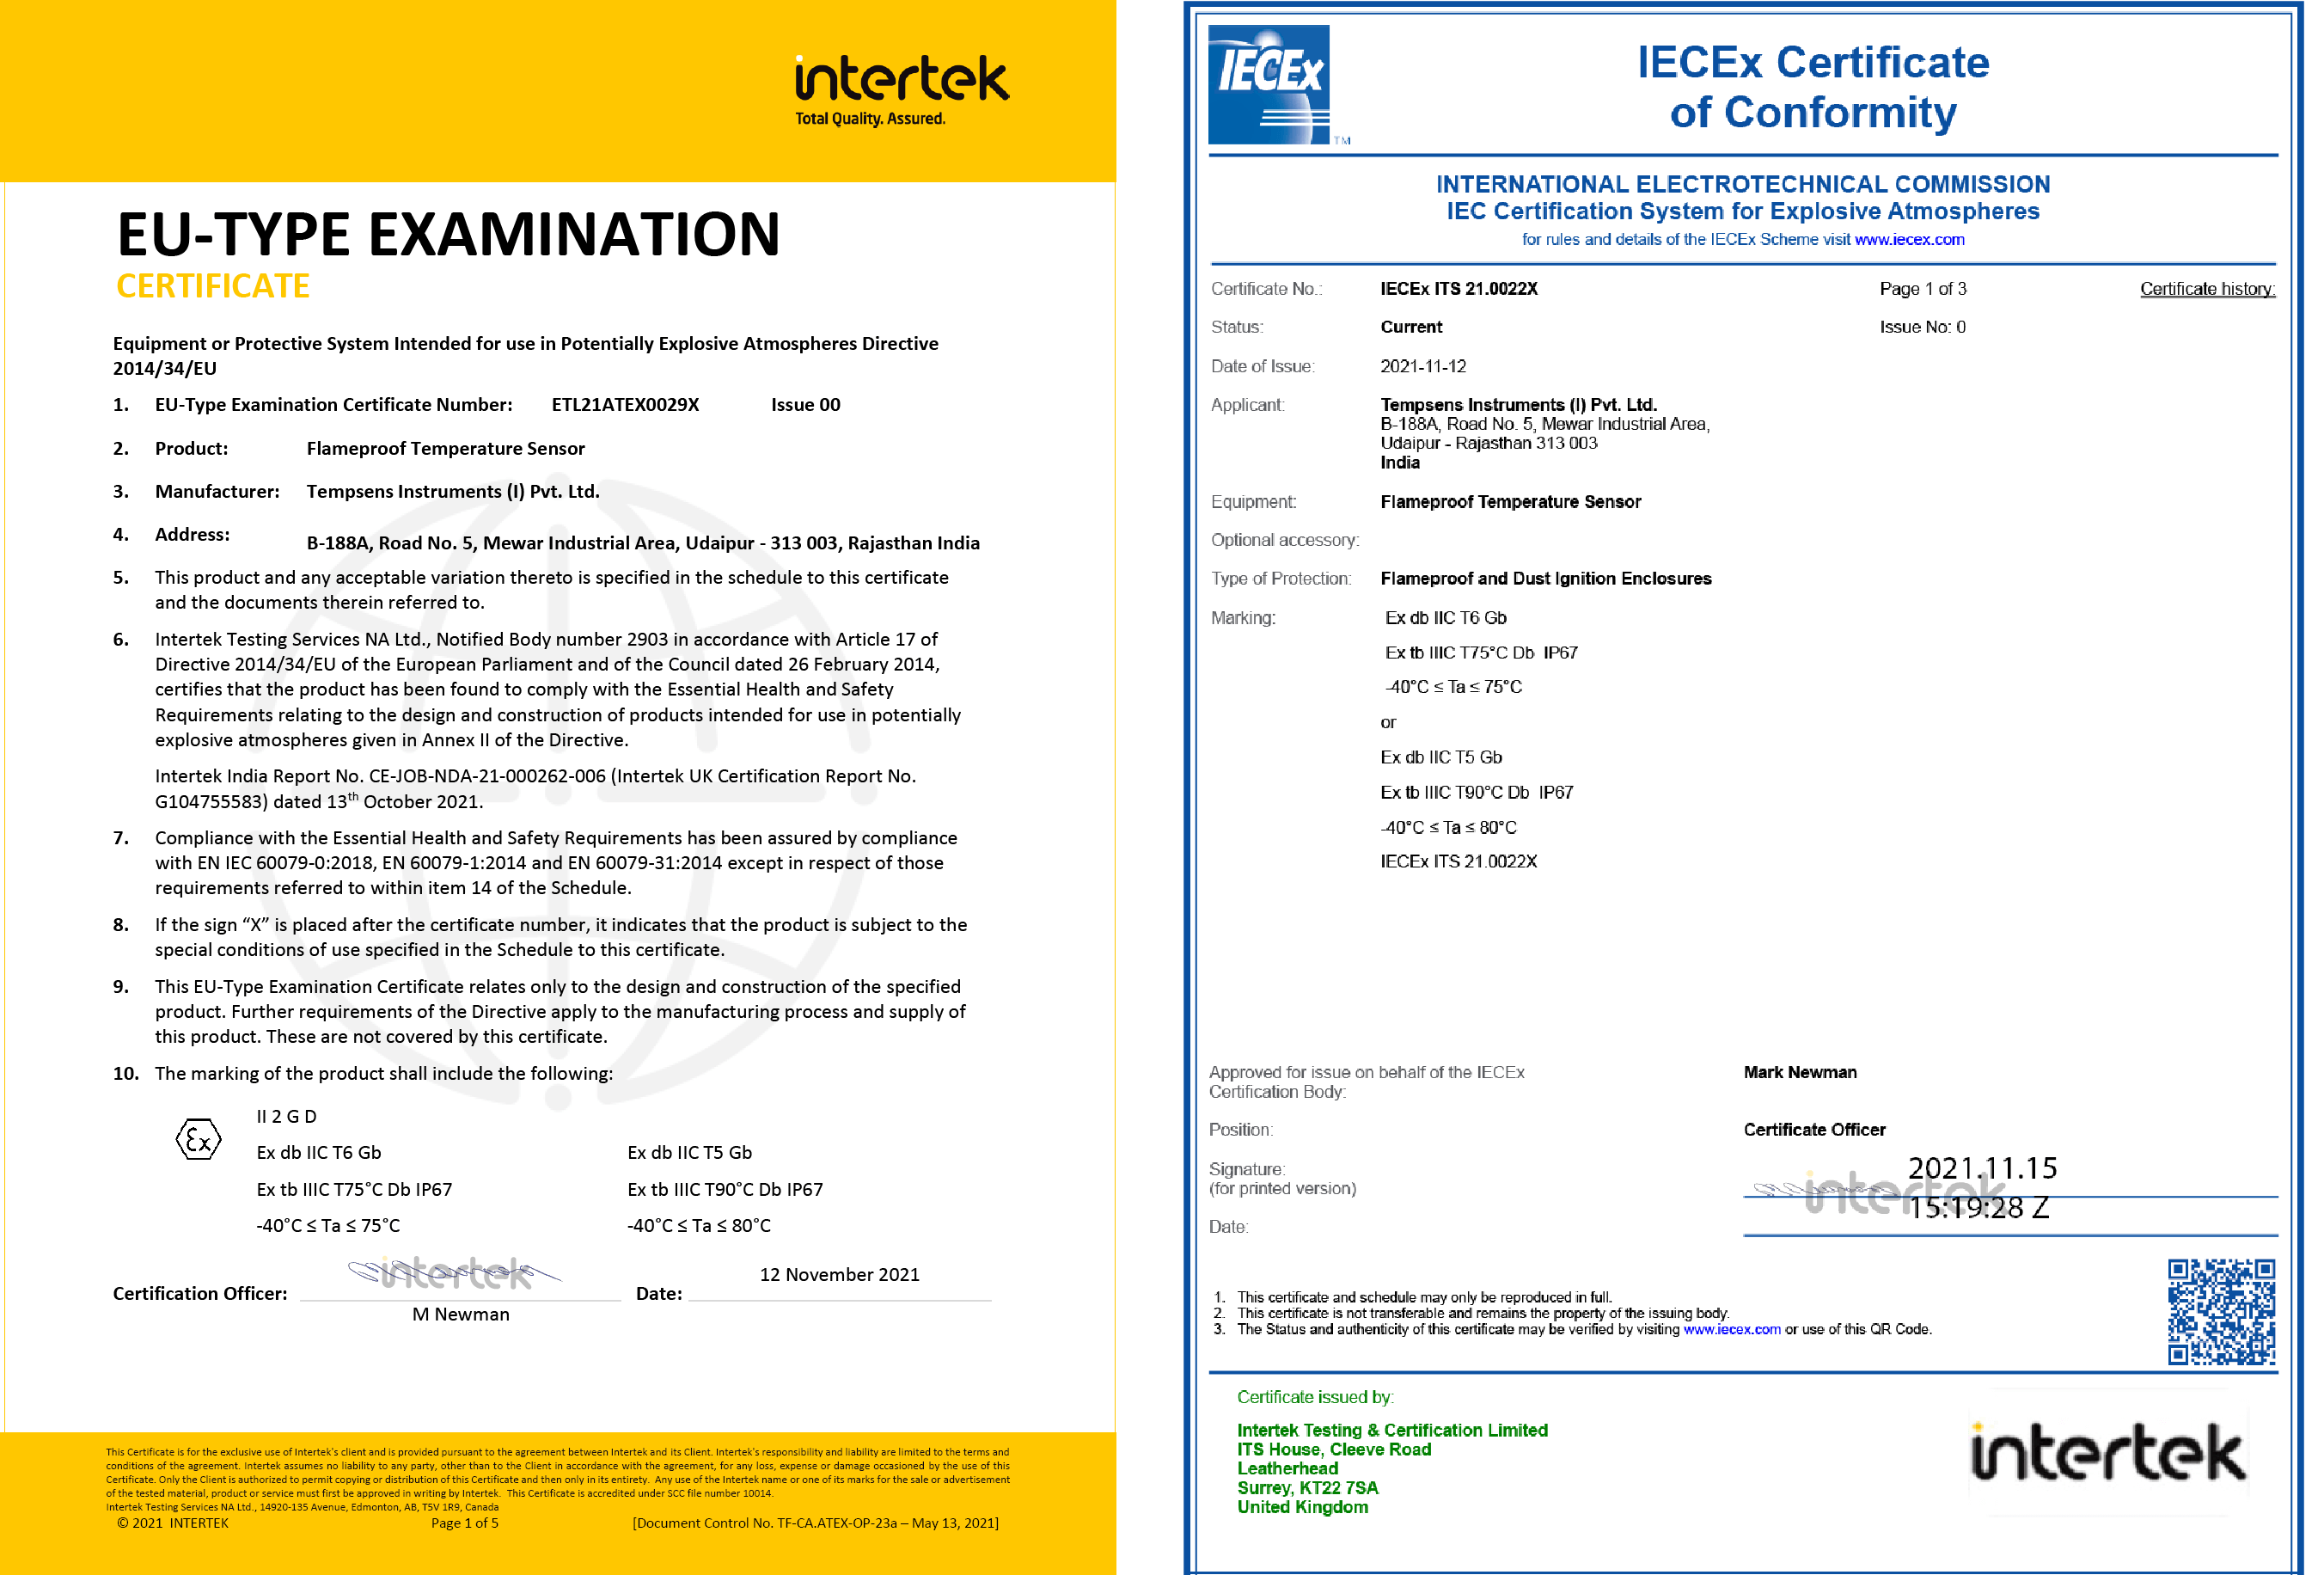 ATEX and IECEx Certificate